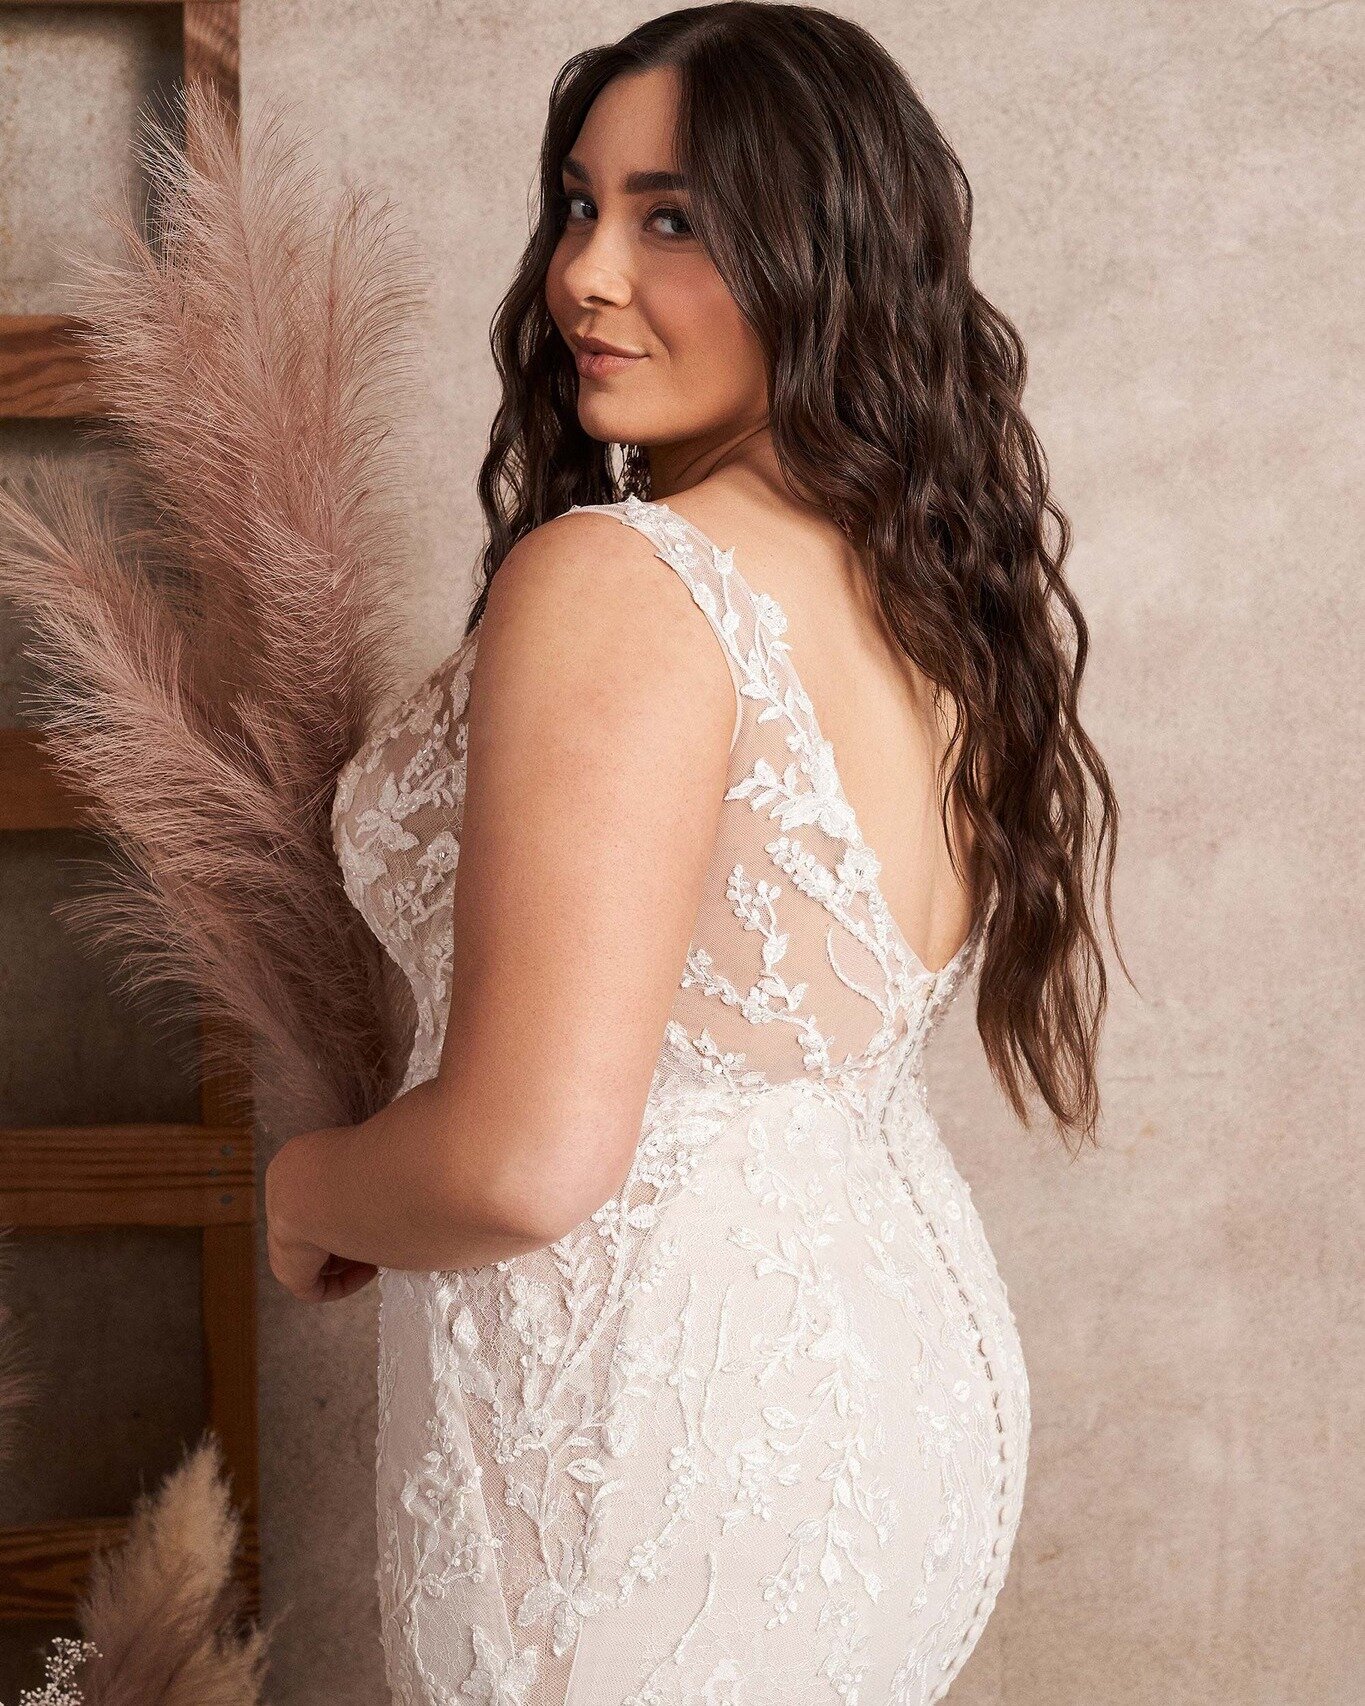 At Norah's Bridal we know that beauty comes in all shapes and sizes. Your bridal dress shopping experience should be one of the best days ever (second to your wedding day, of course!). 

That's why we are excited to share that one of our favorite des